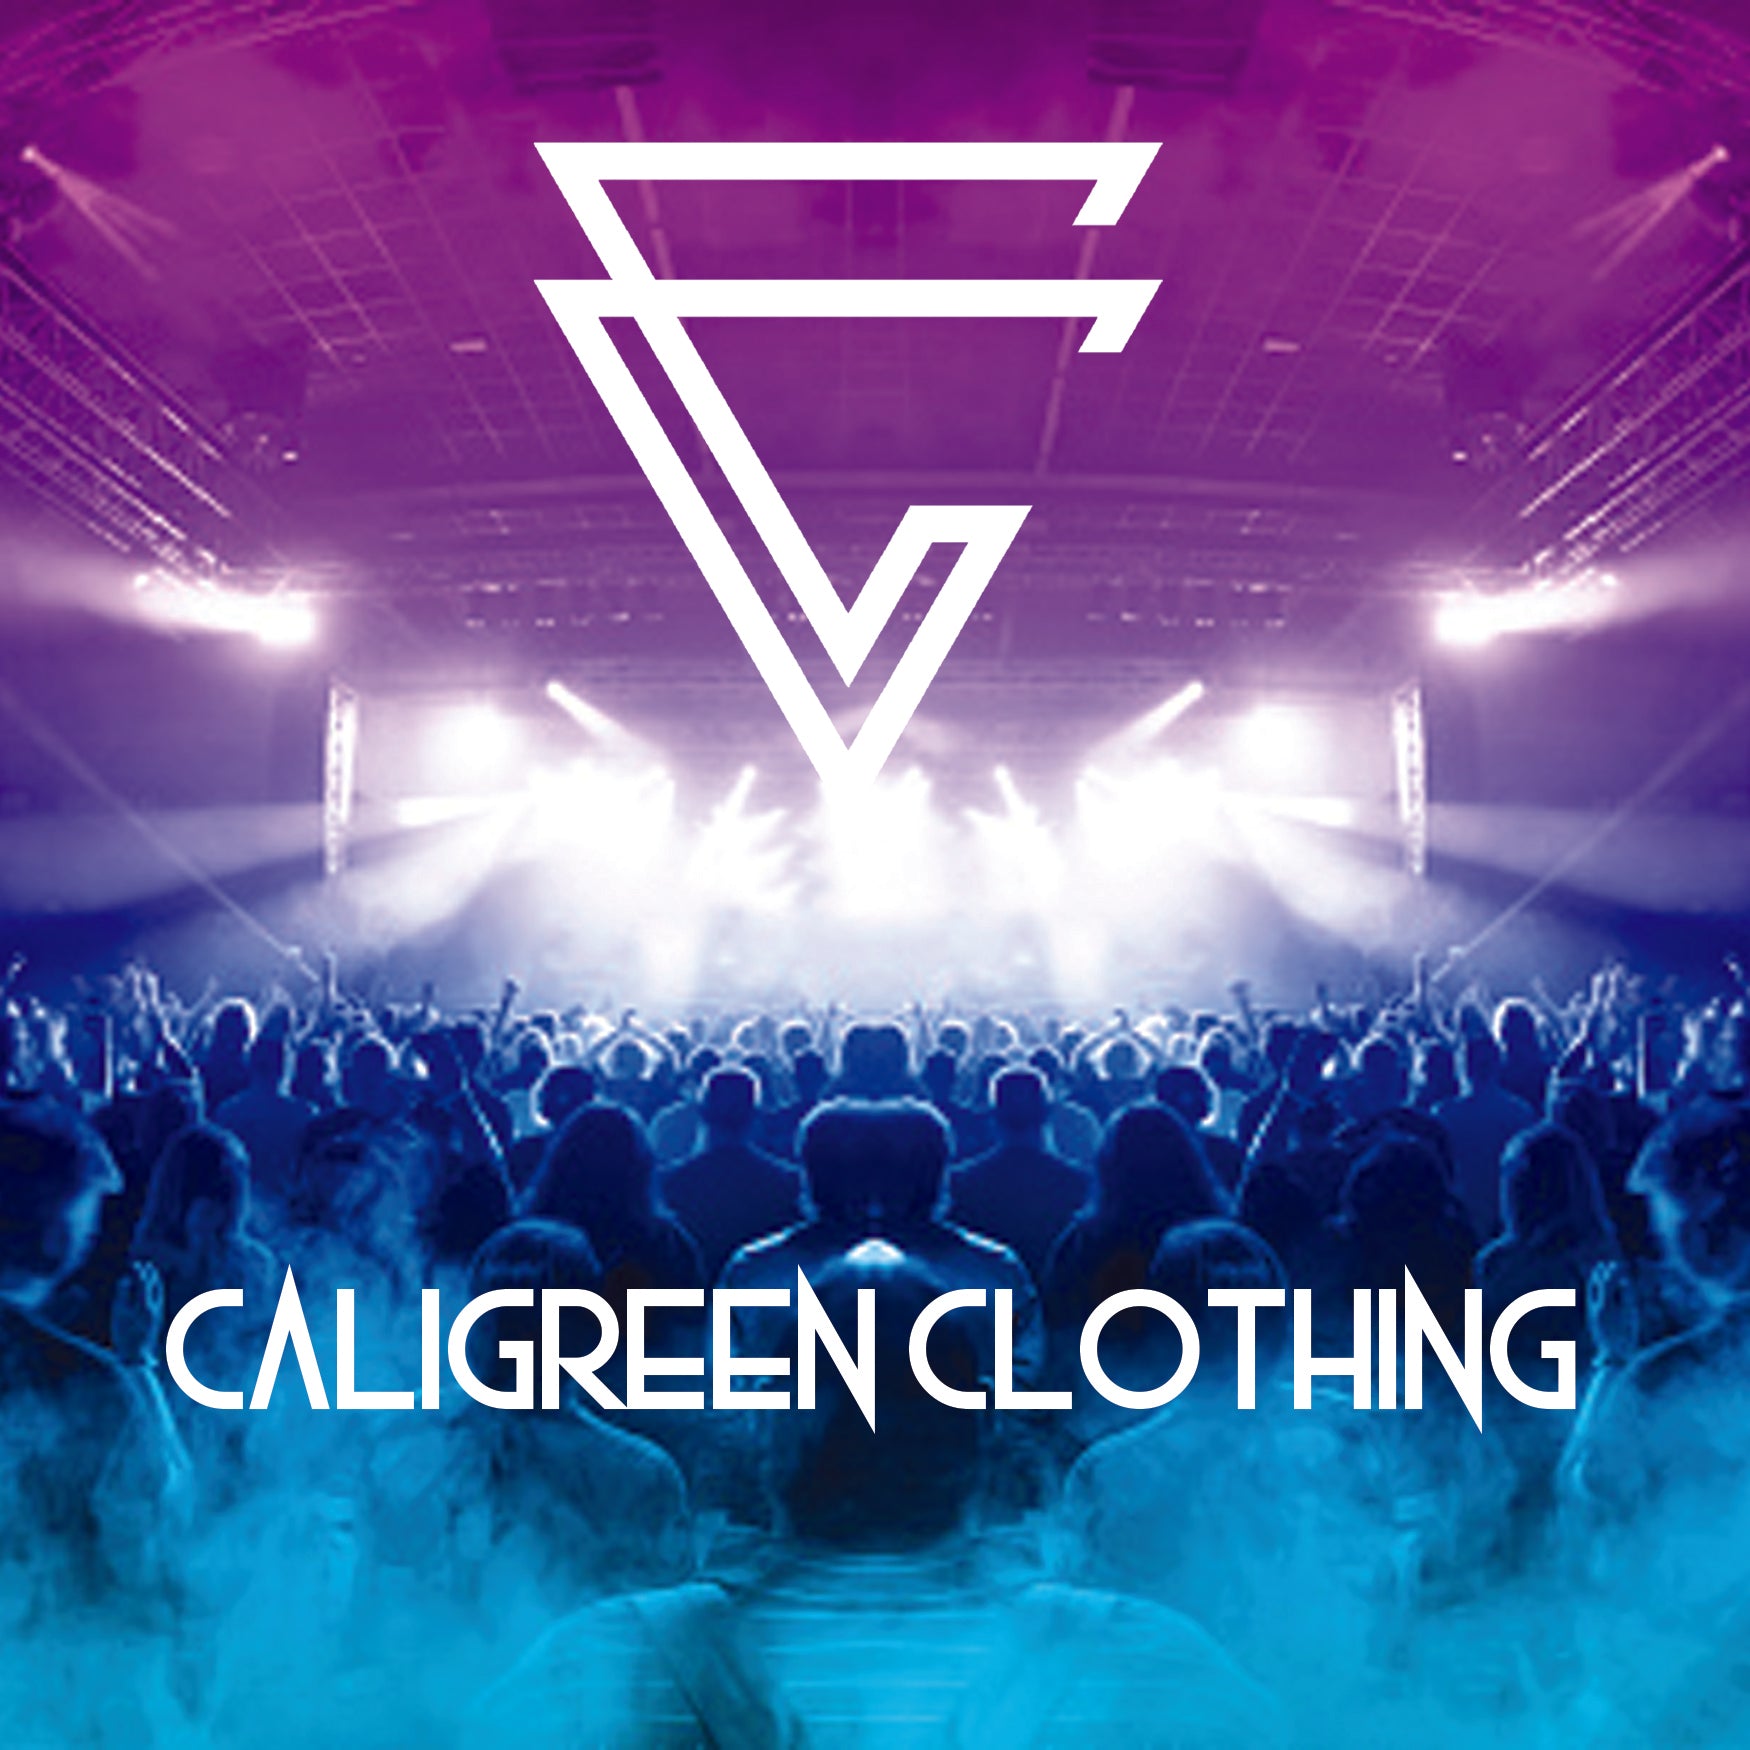 Caligreen is always in #style! Get your CaliGreen Dodgers Crop Top #Urban !  Visit www.caligreenclothing.com and get yours today!…